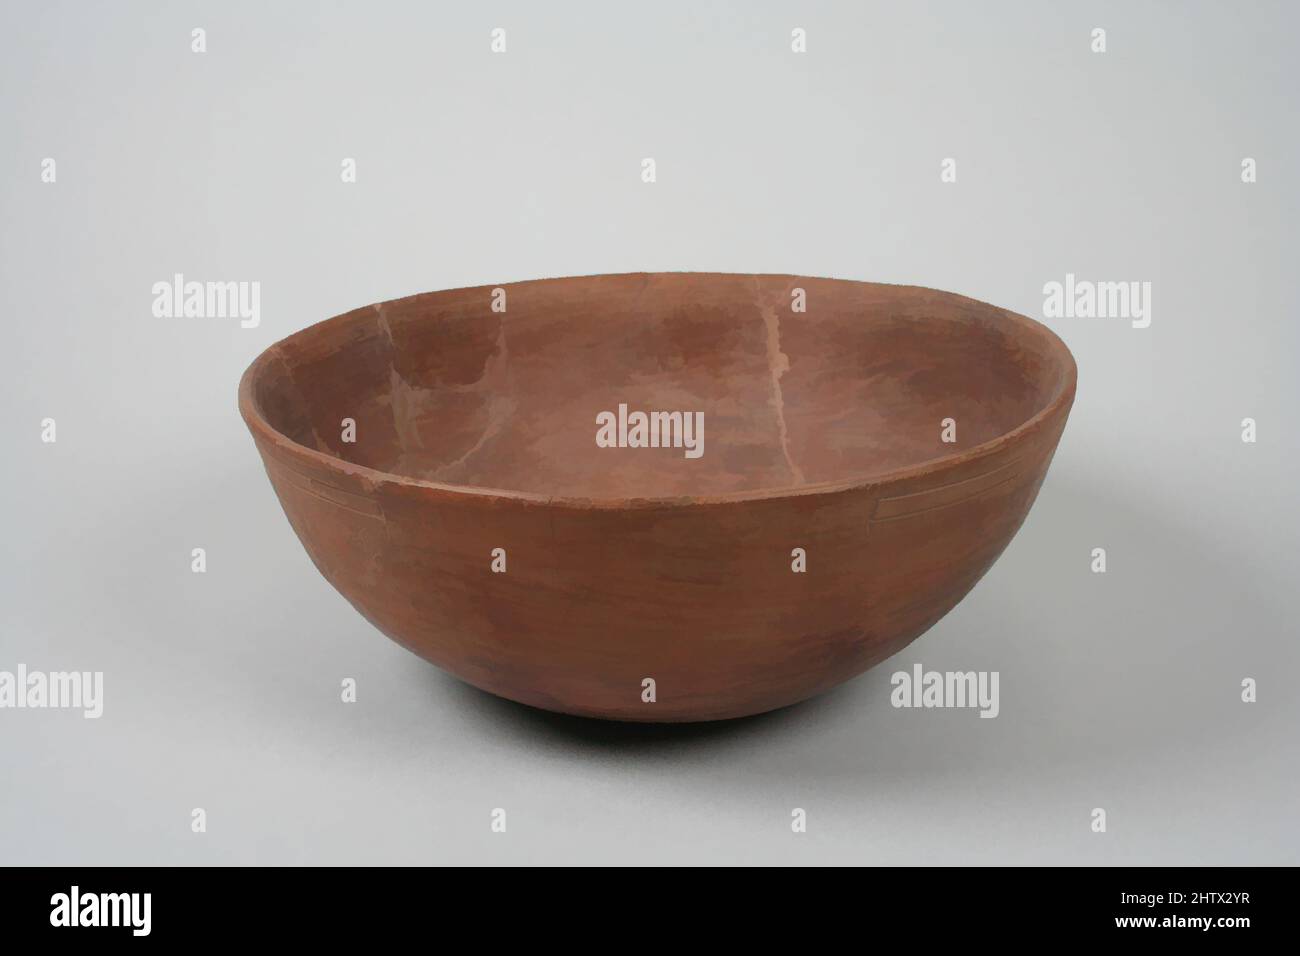 https://c8.alamy.com/comp/2HTX2YR/art-inspired-by-undecorated-painted-bowl-4th3rd-century-bc-peru-paracas-ceramic-slip-overall-3-in-762-cm-ceramics-containers-classic-works-modernized-by-artotop-with-a-splash-of-modernity-shapes-color-and-value-eye-catching-visual-impact-on-art-emotions-through-freedom-of-artworks-in-a-contemporary-way-a-timeless-message-pursuing-a-wildly-creative-new-direction-artists-turning-to-the-digital-medium-and-creating-the-artotop-nft-2HTX2YR.jpg